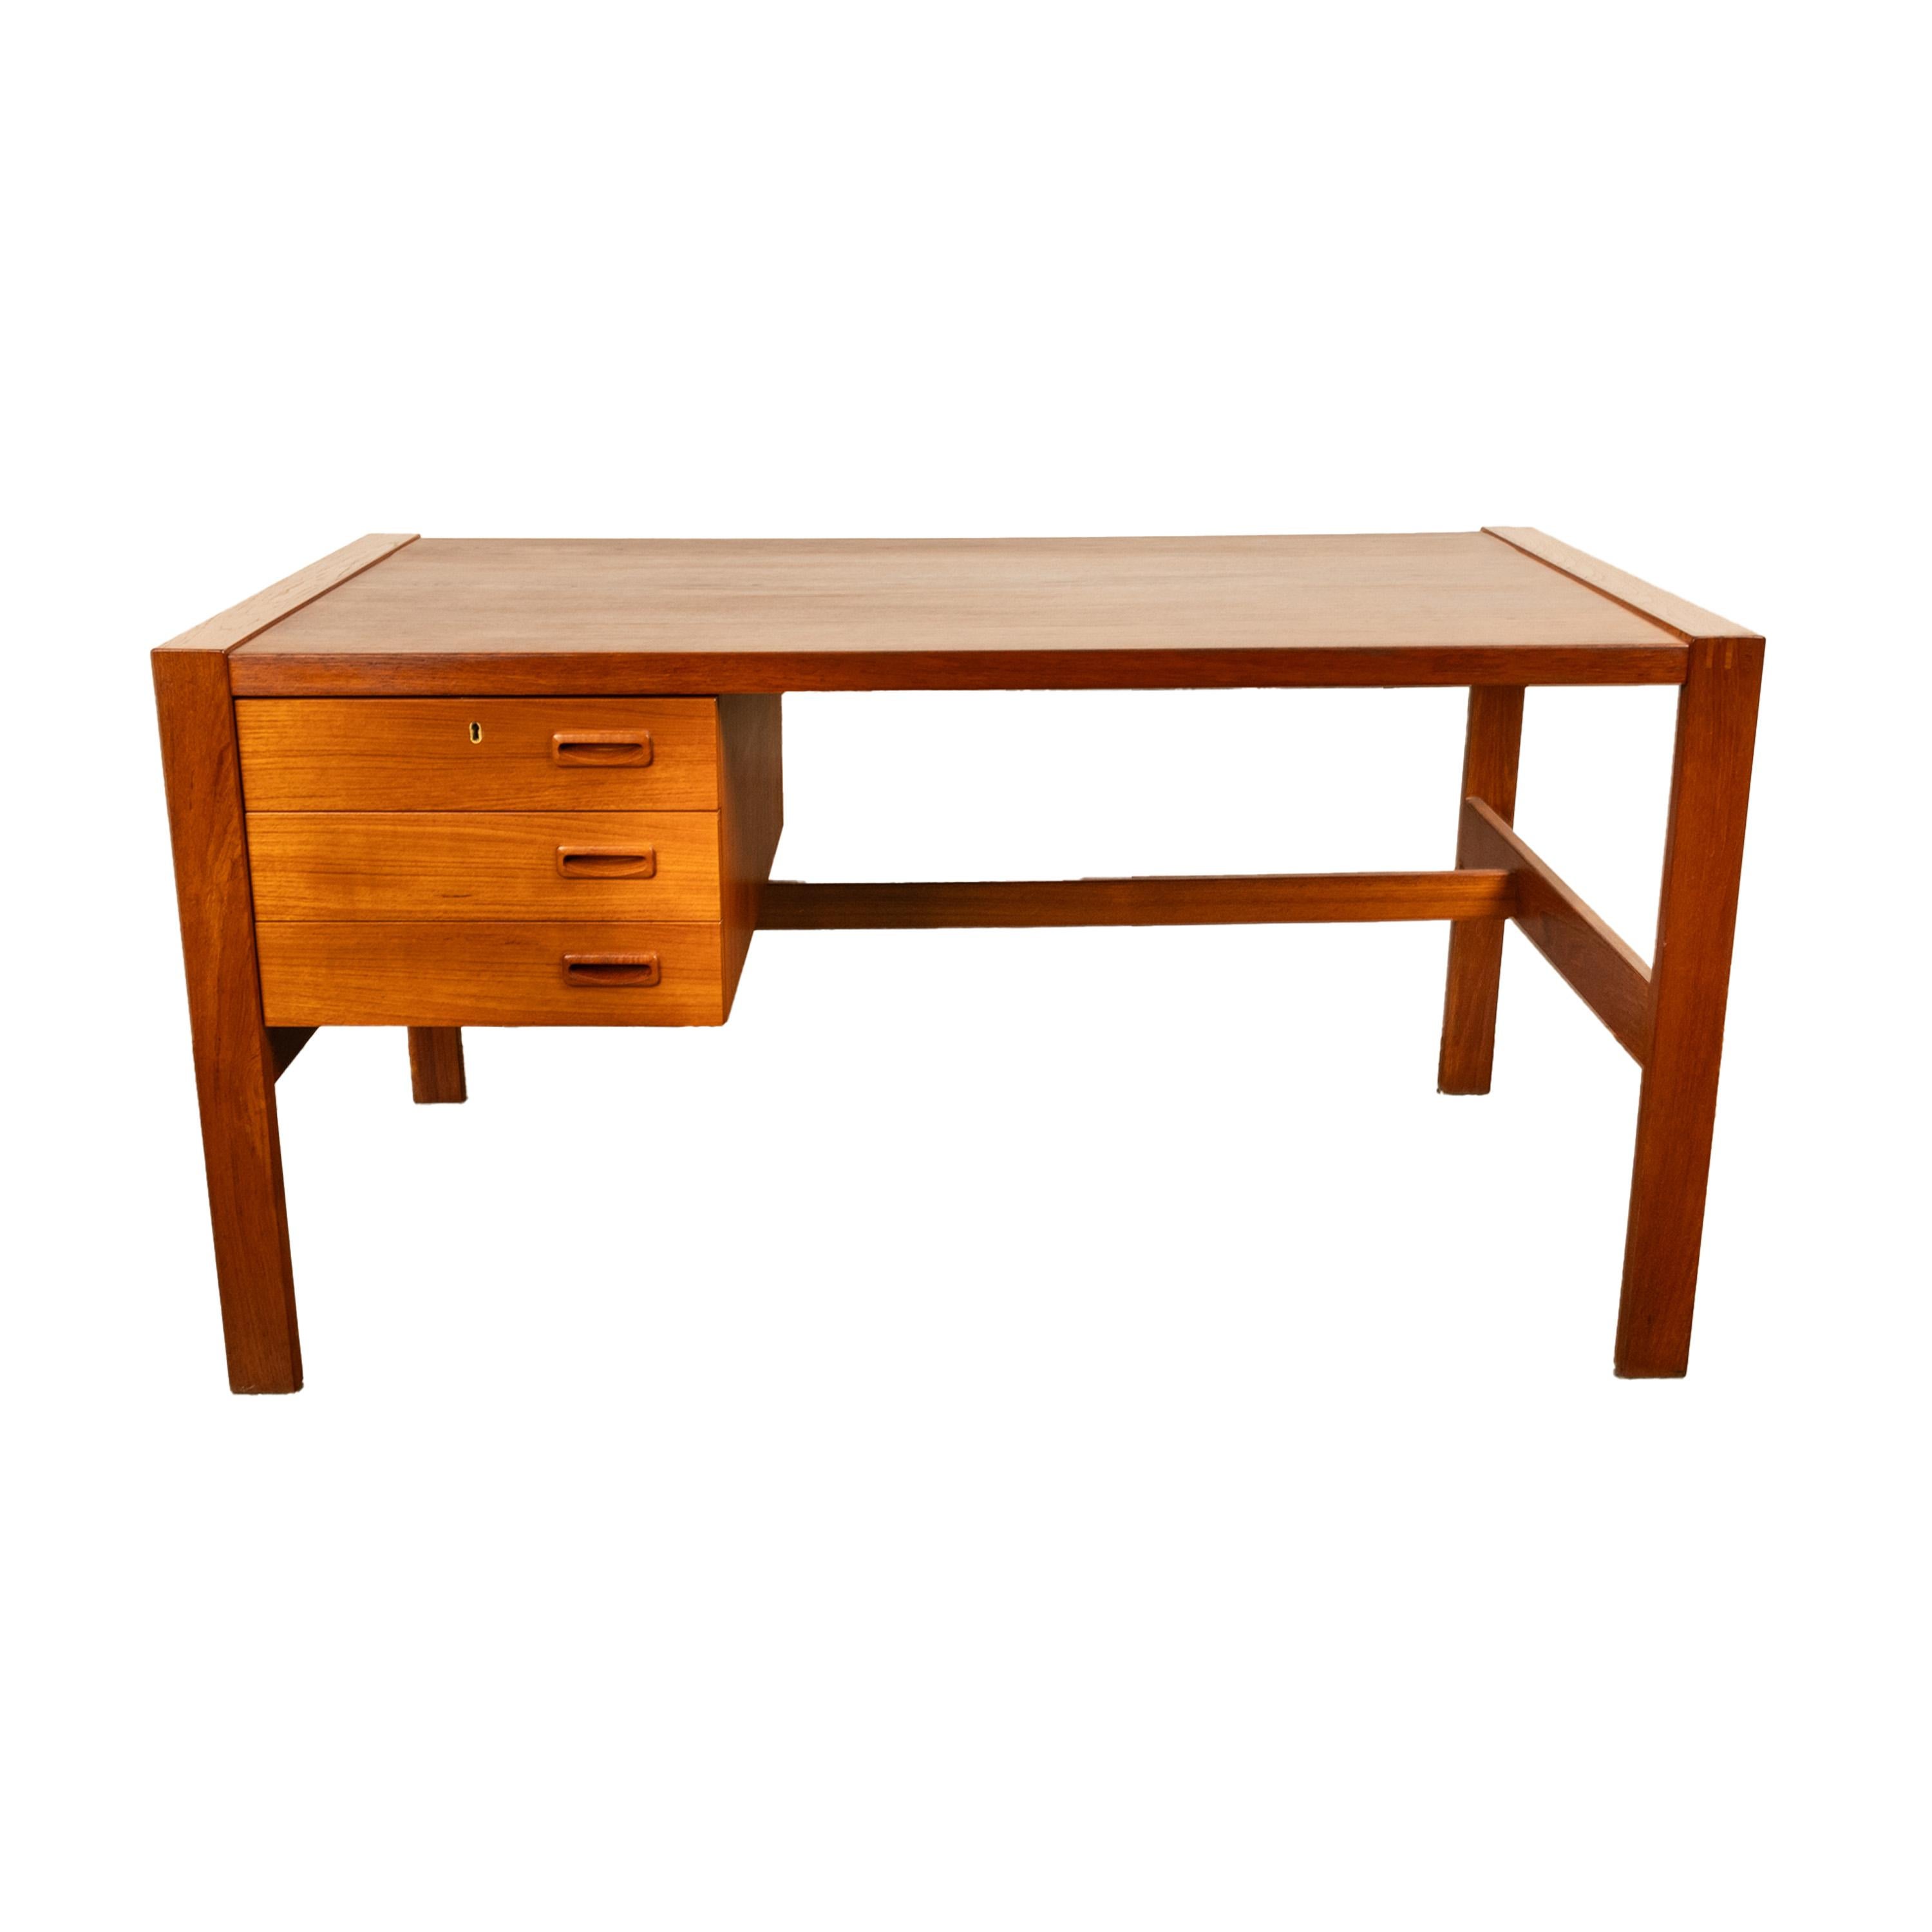 A good Mid Century Modern Danish teak desk, Skovby Møbelfabrik, 1970.
The desk is made from well figured teak, on the left side is a bank of three drawers, the desk is joined with a 'T' shaped stretcher. The desk has 'exposed' tenons to the top of